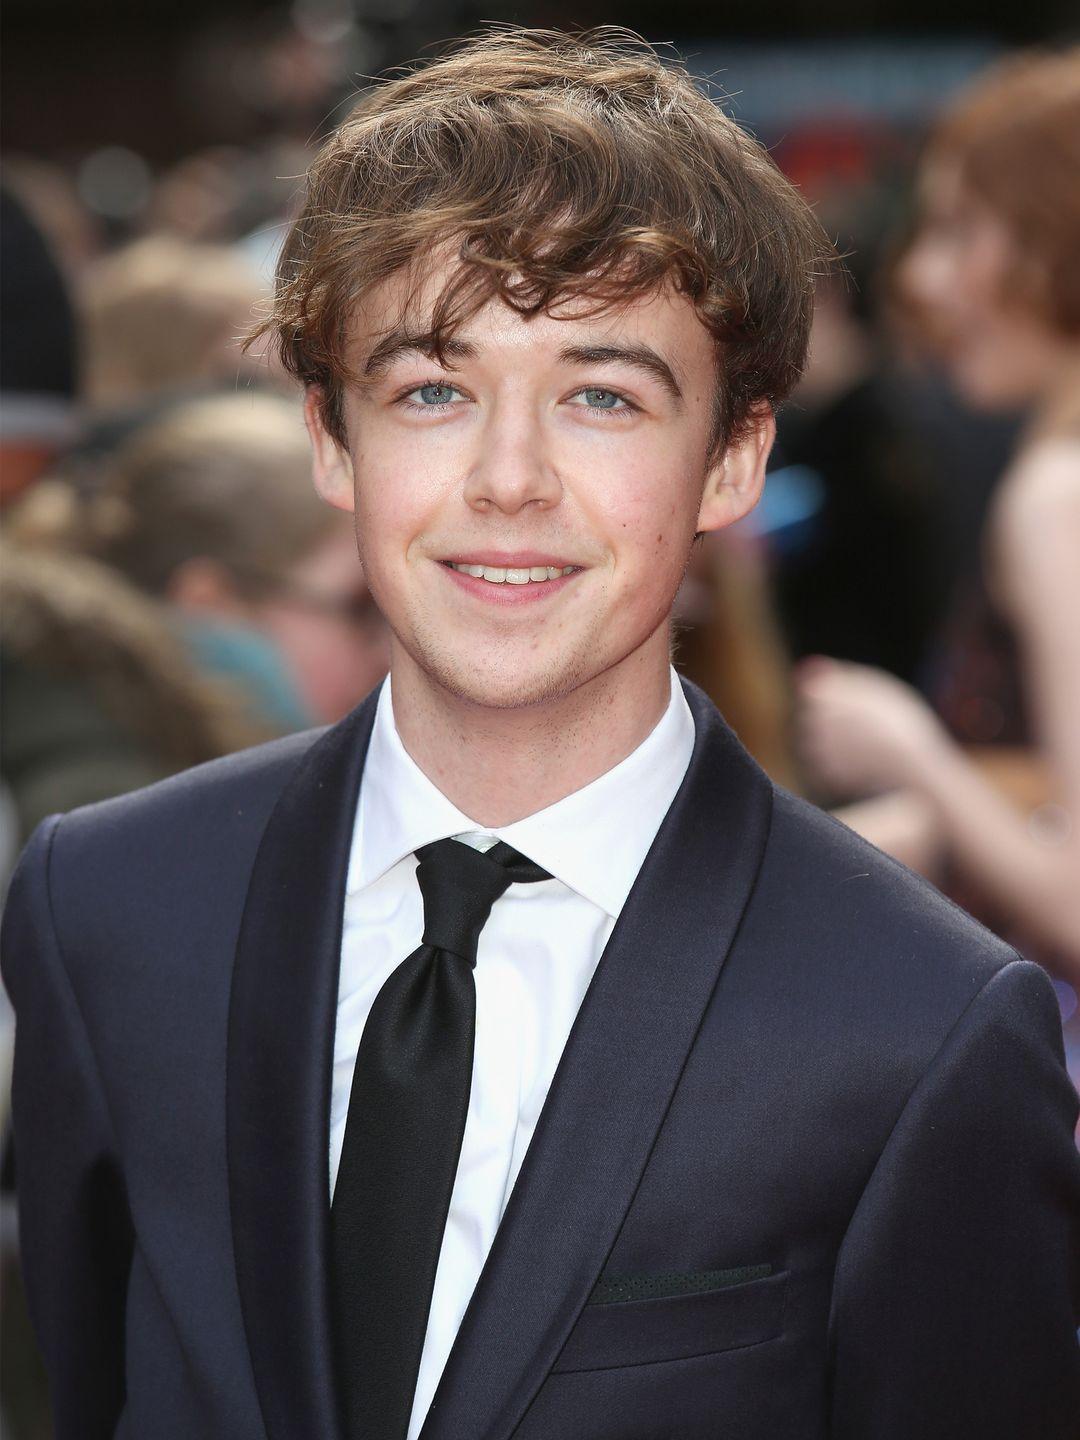 Alex Lawther appearance